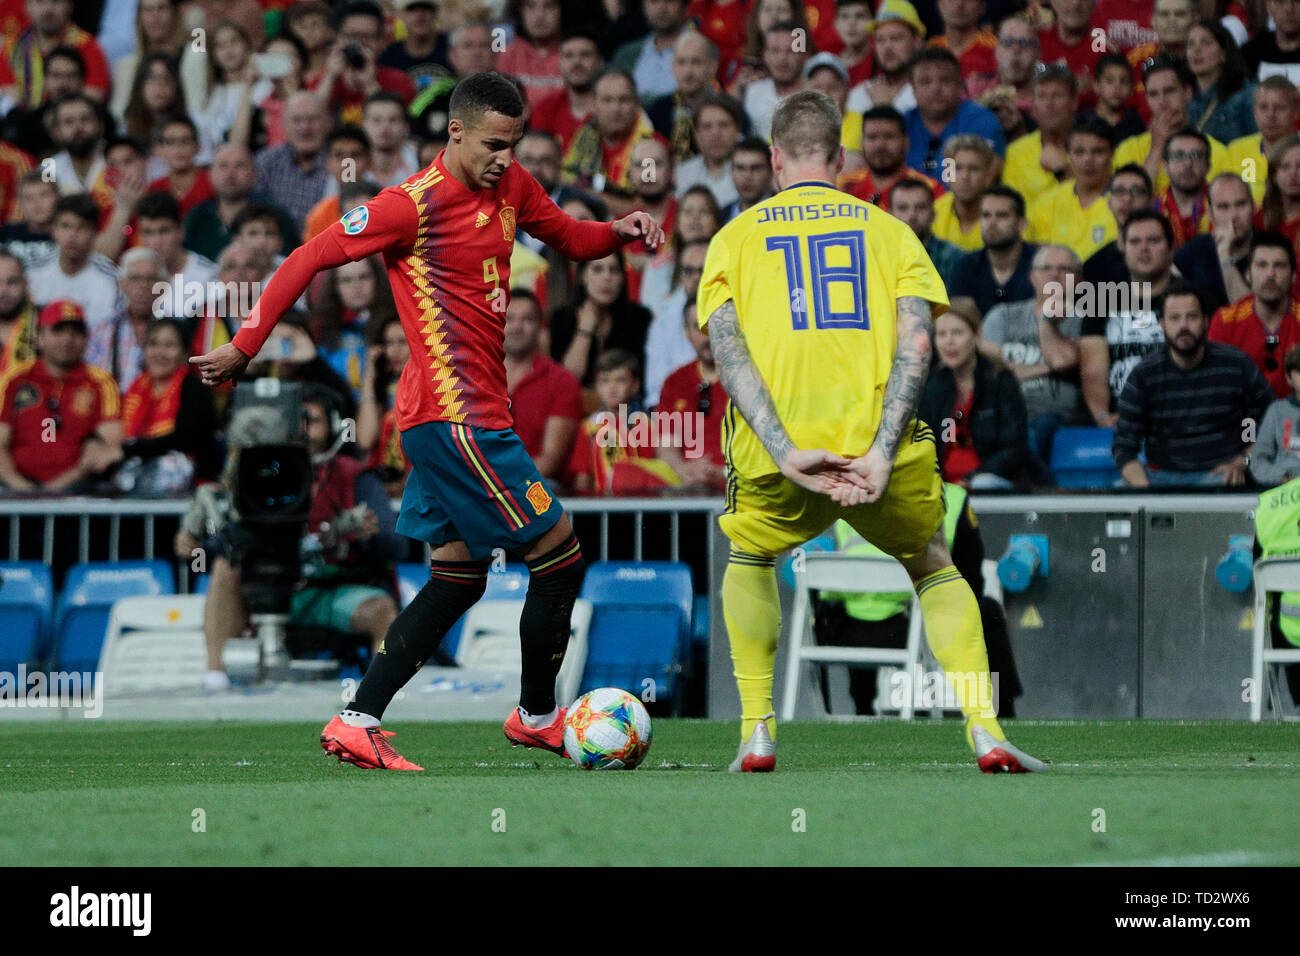 Spain national team player Rodrigo and Sweden national team player Pontus Jansson seen in action during the UEFA EURO 2020 Qualifier match between Spain and Sweden at Santiago Bernabeu Stadium in Madrid. Final score: Spain 3 - Sweden 0 Stock Photo